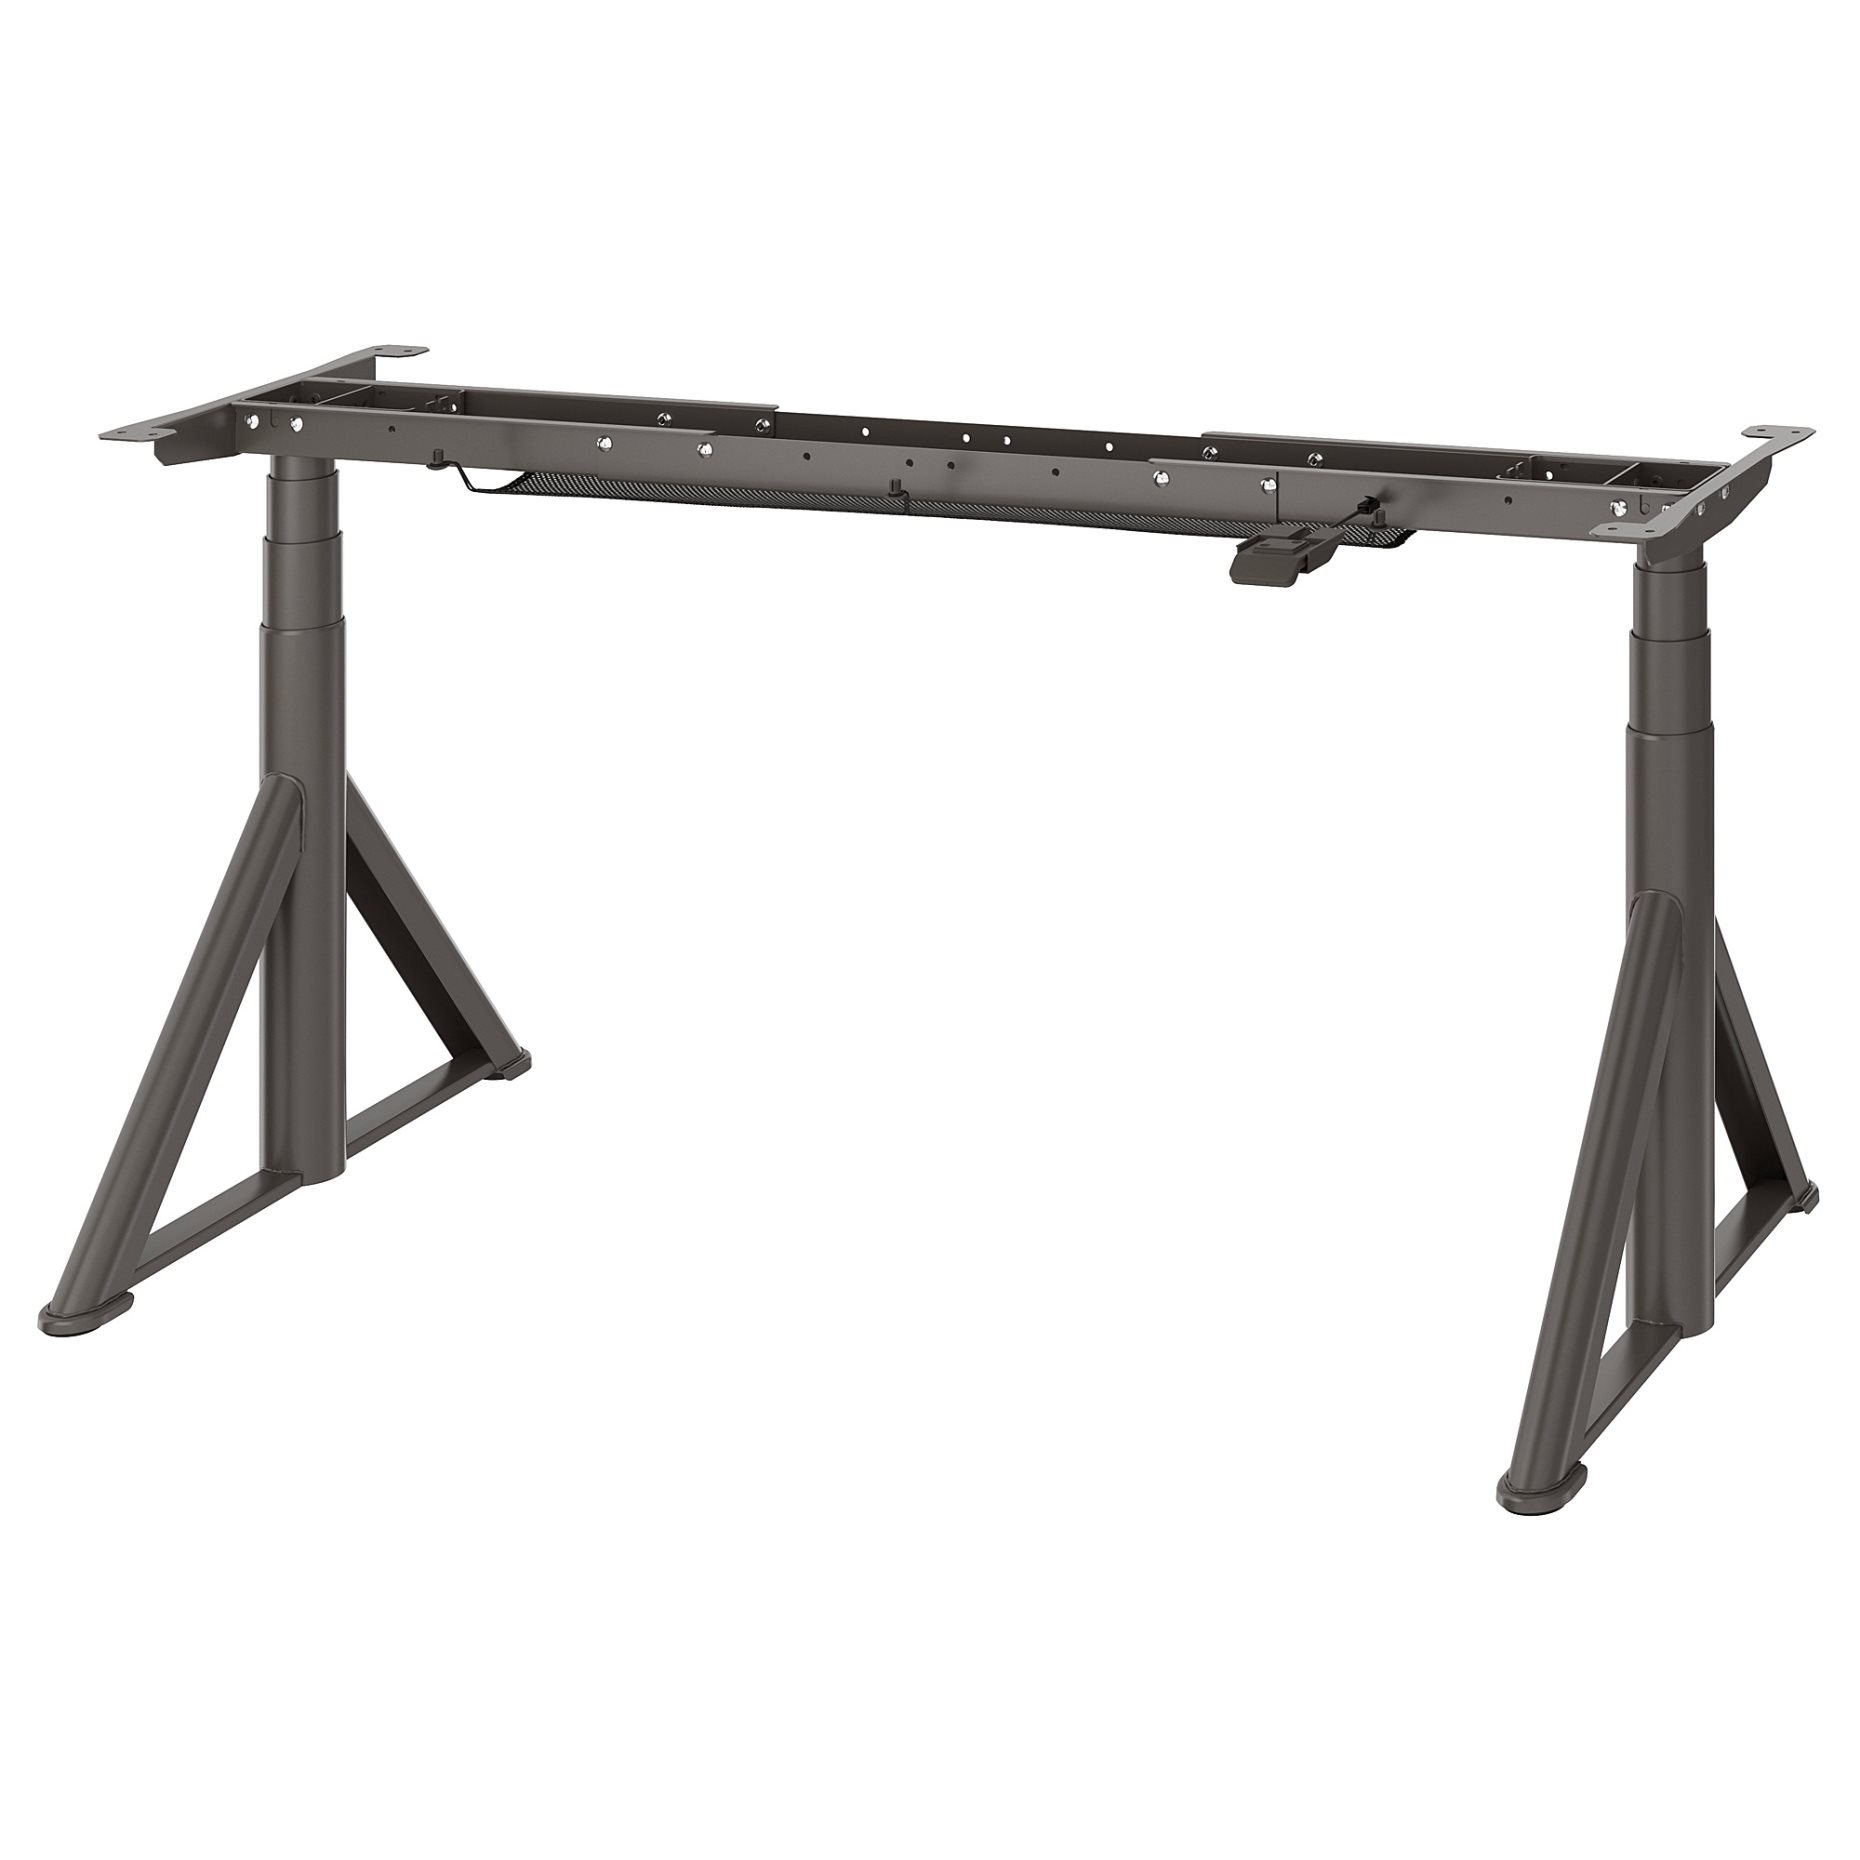 IDÅSEN, underframe sit/stand for table top, electrical, 003.207.23